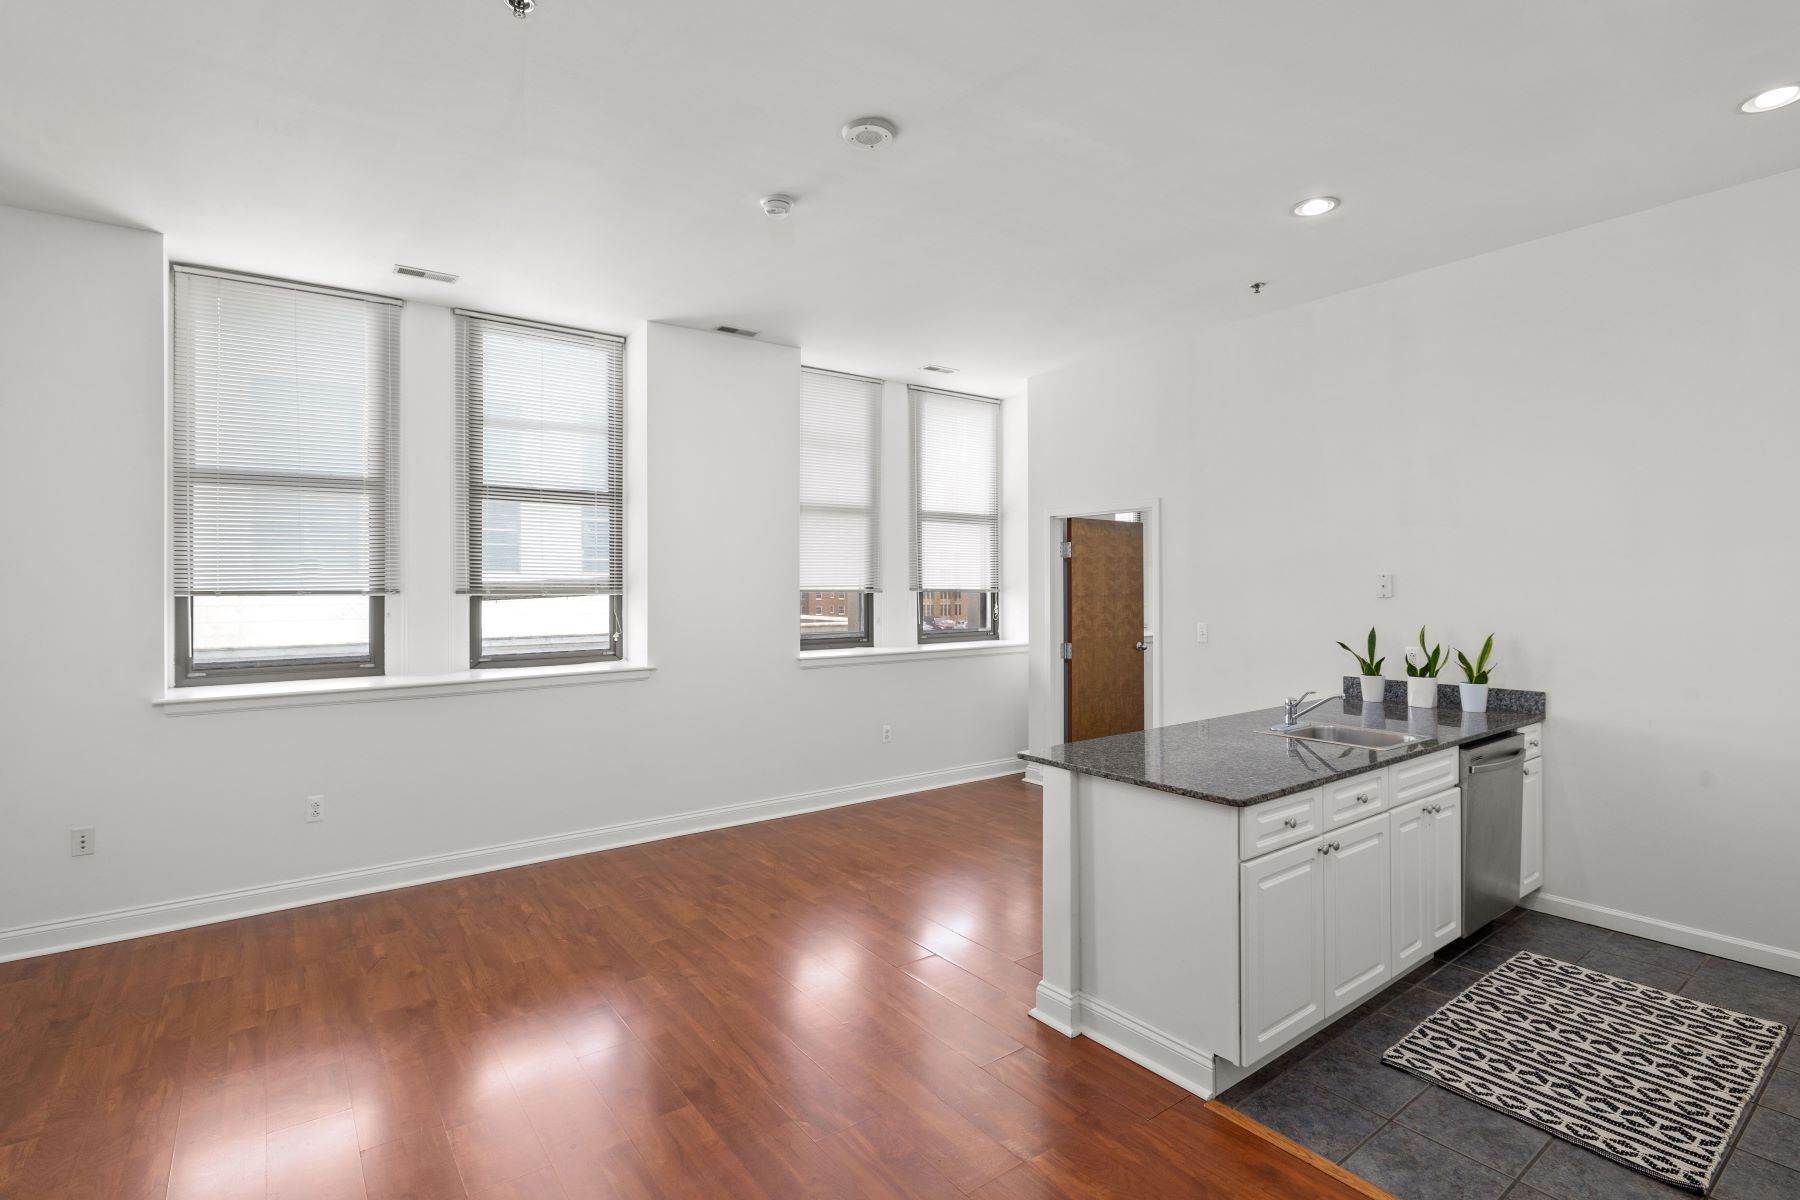 12. Condominiums for Sale at 1001-13 Chestnut Street, Philadelphia, PA 19107 1001-13 Chestnut Street, #603E Philadelphia, Pennsylvania 19107 United States